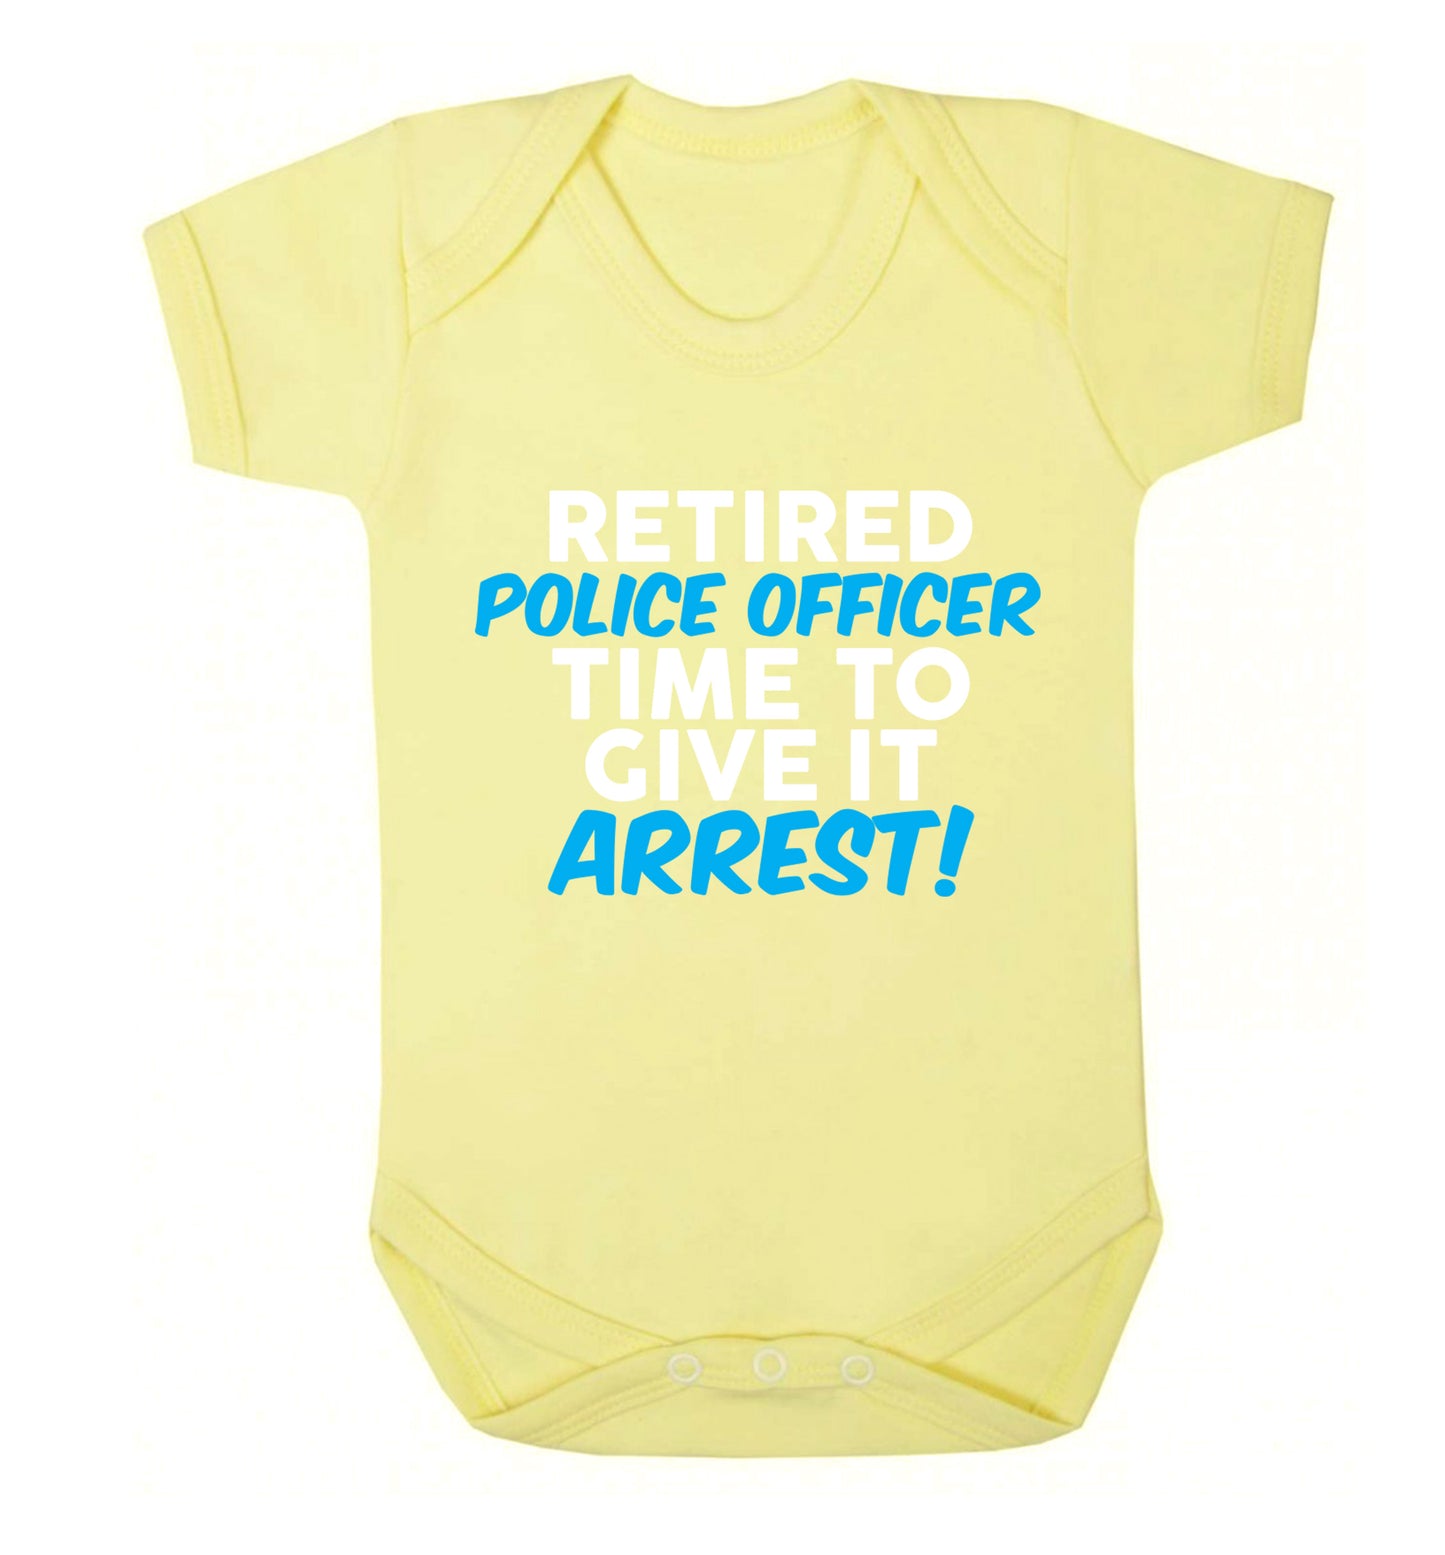 Retired police officer time to give it arrest Baby Vest pale yellow 18-24 months